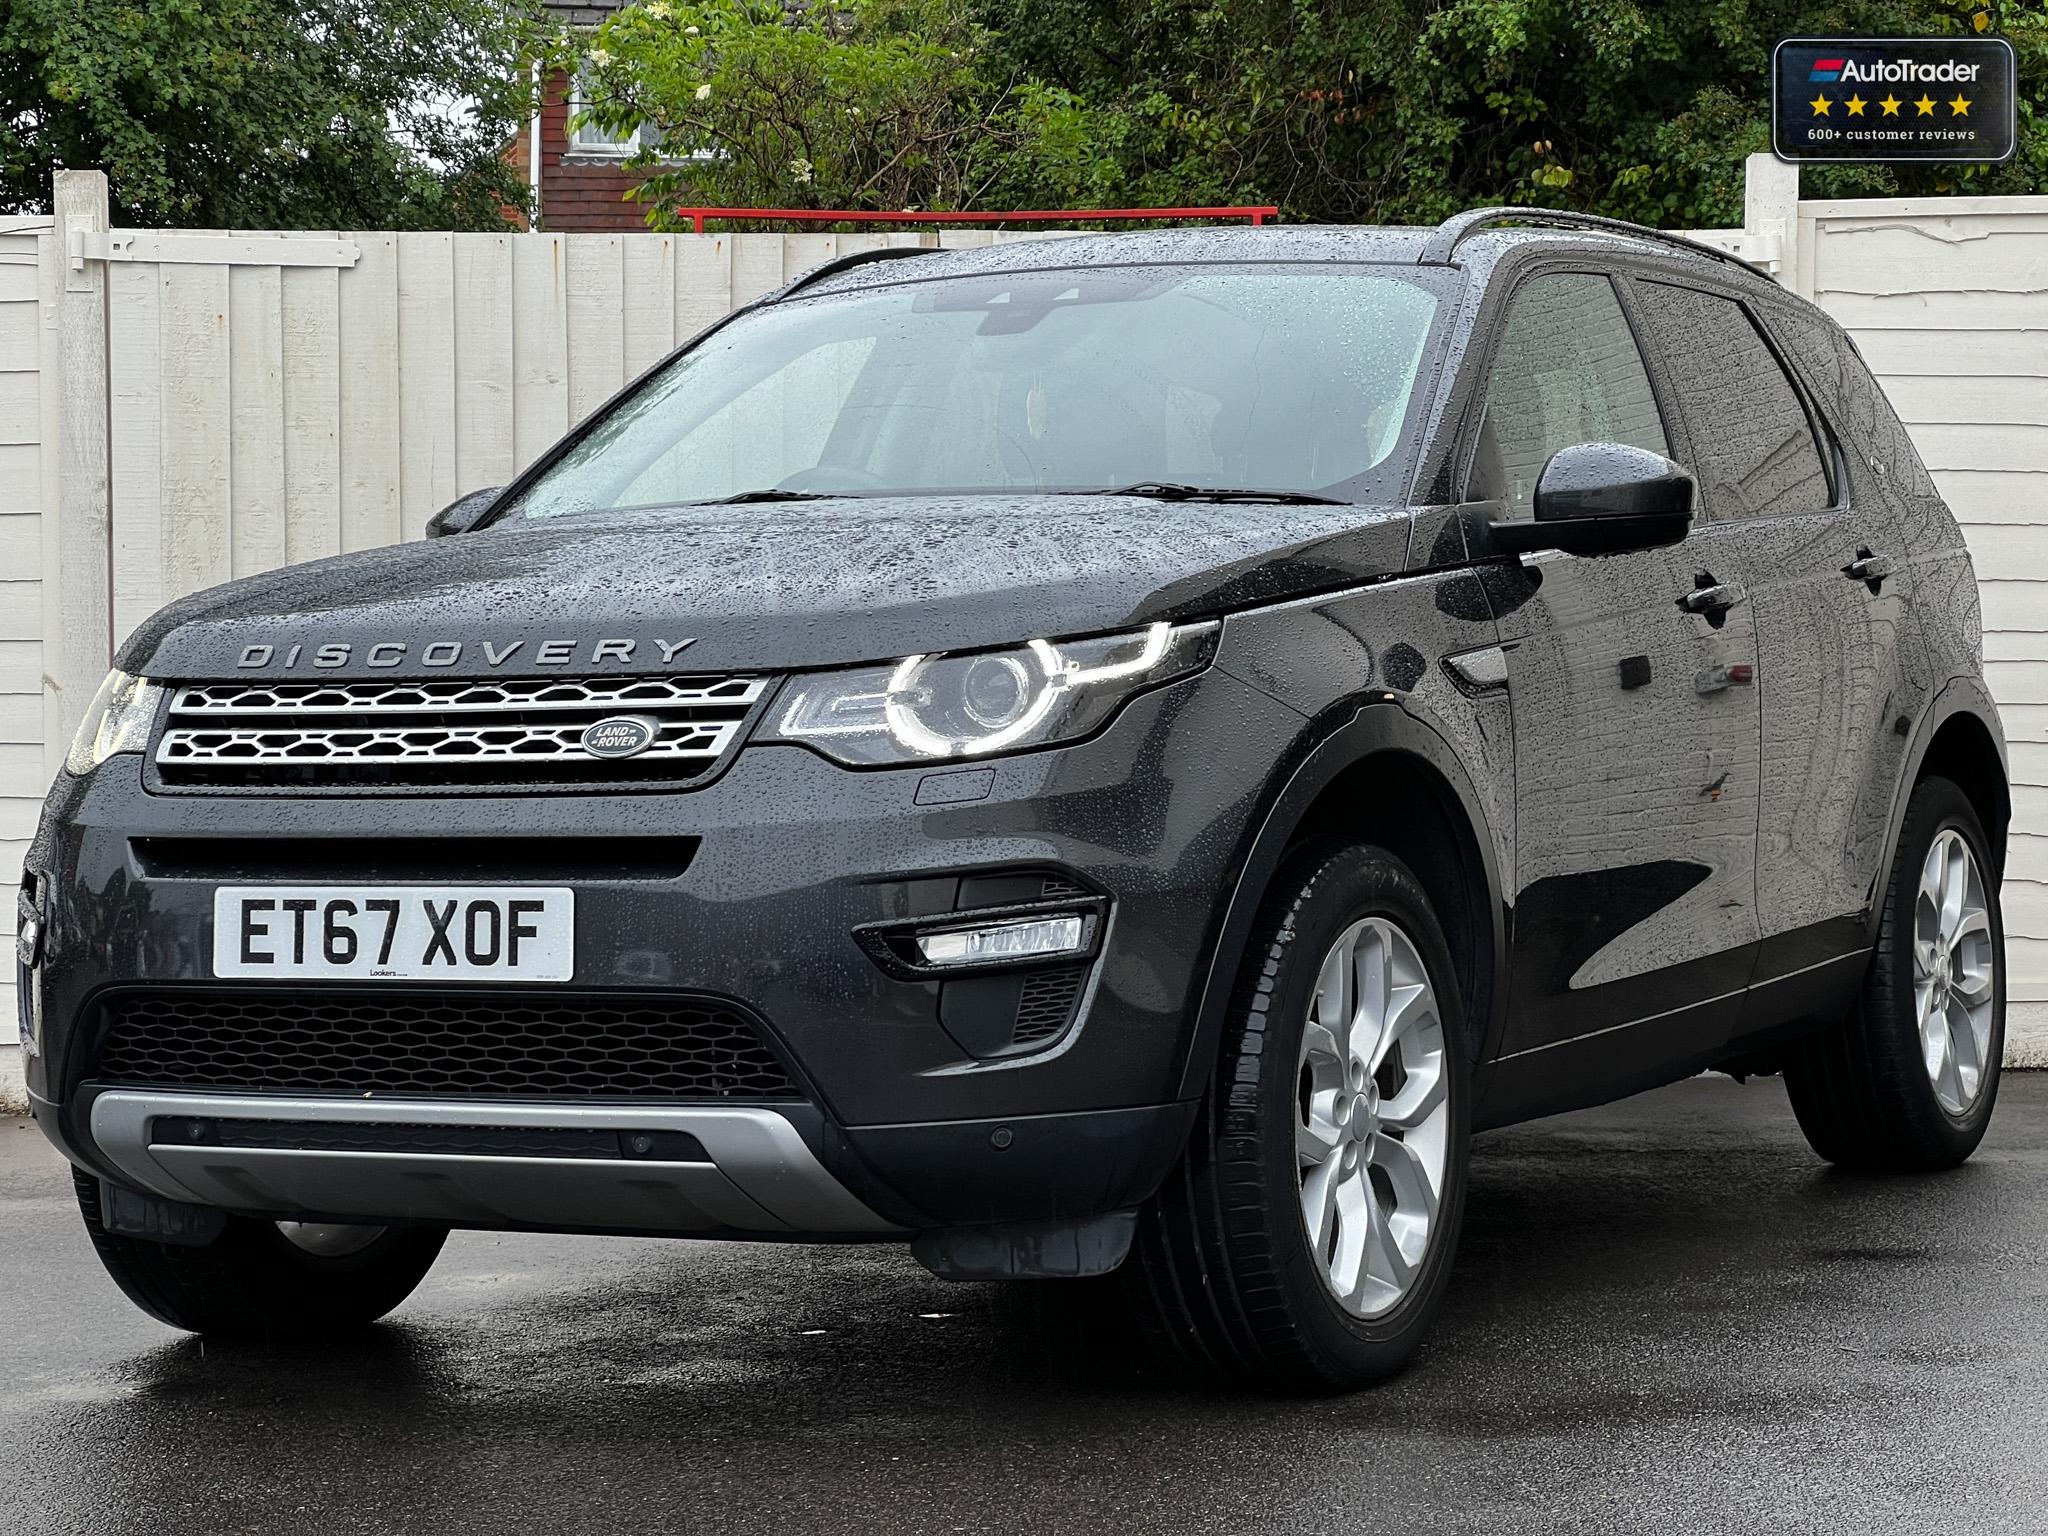 Land Rover Discovery Sport ET67 XOF